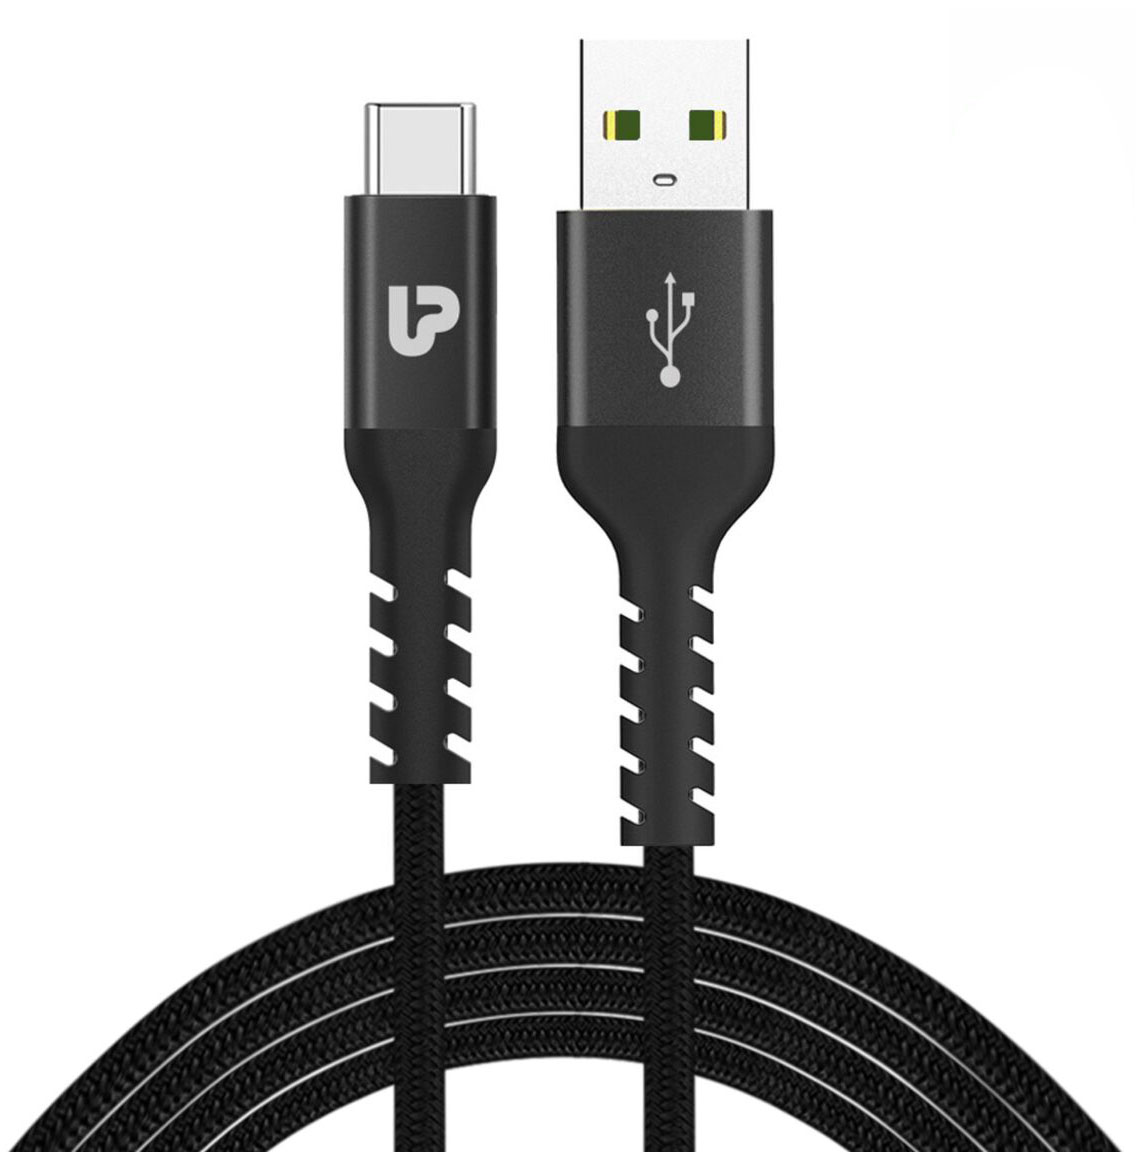 UltraProlink UL1022 NYLOKEV-C+ Sync and Chare Cable 1.5m (Black)